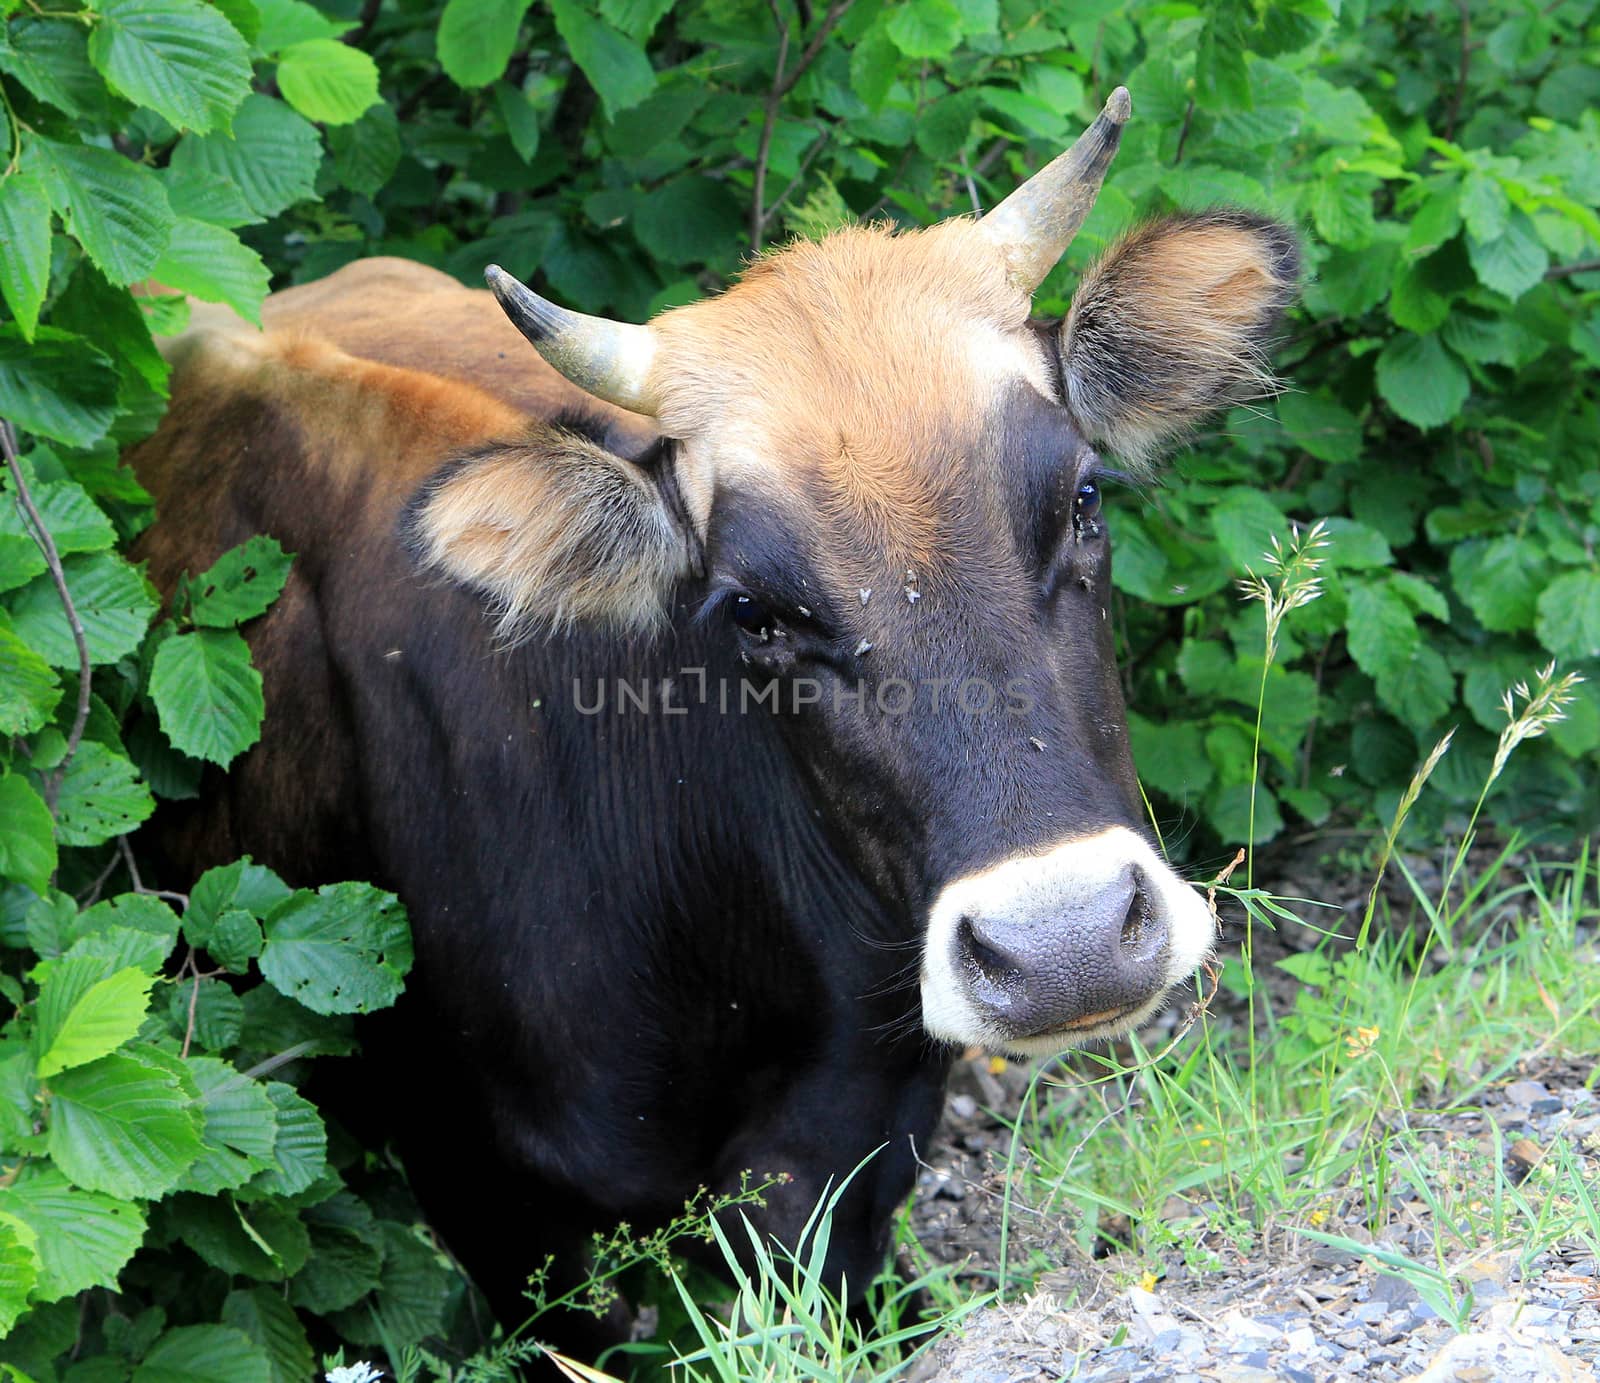 Cow posing on green leaves background